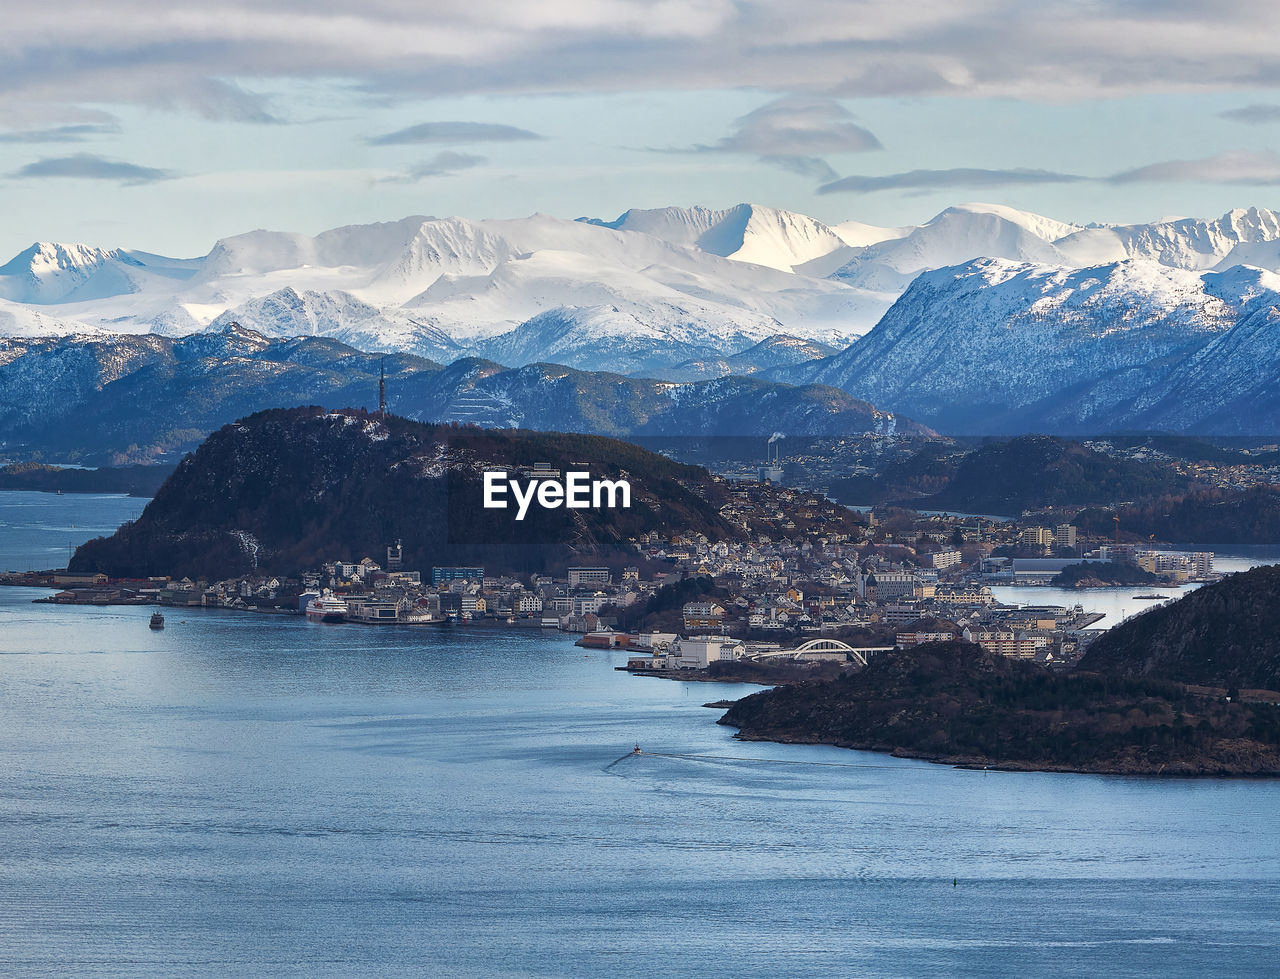 View towards Ålesund from godøy mountain, norway.